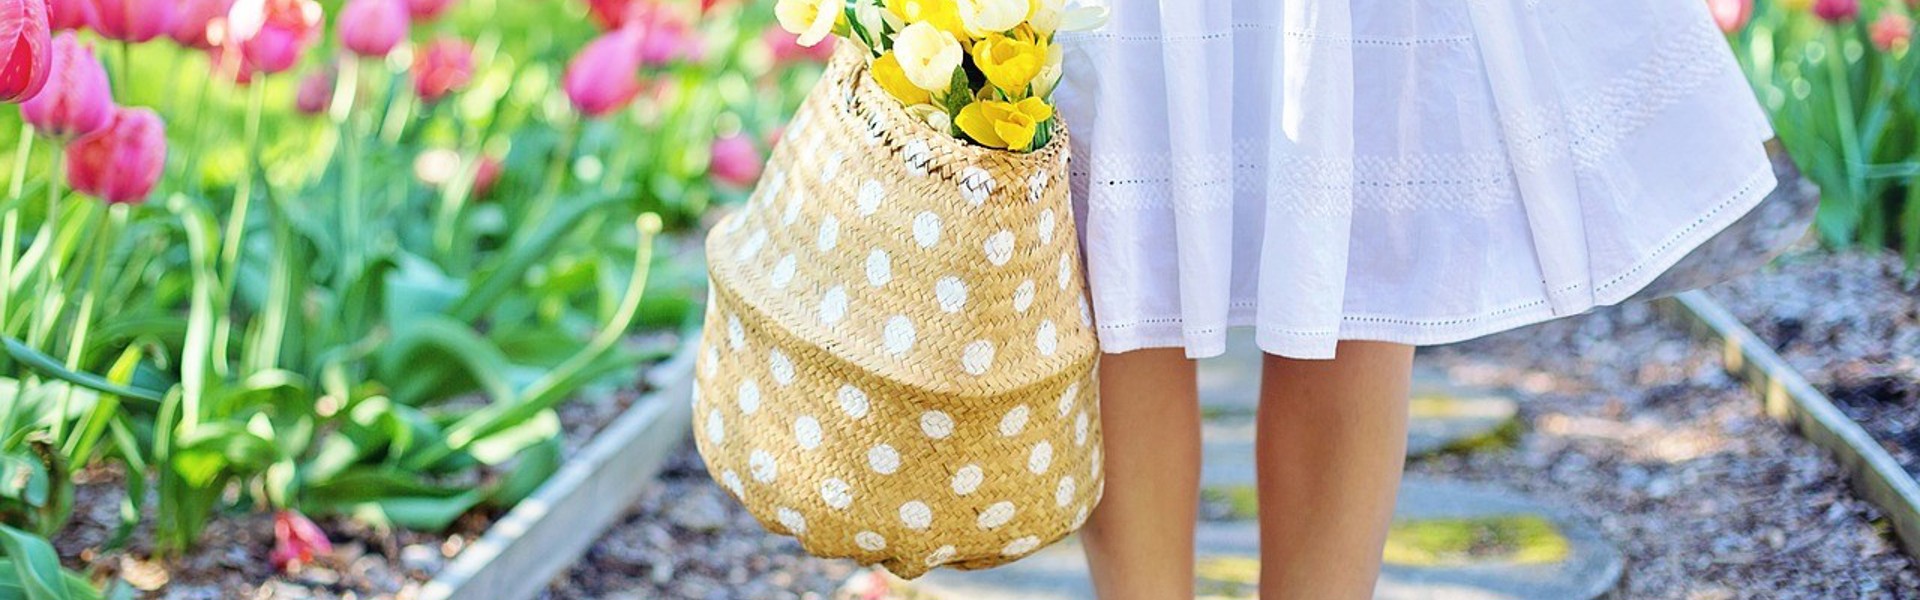 a person wearing a light blue summer dress standing barefoot in the garden holding a polka dot wicker bag filled with yellow flowers